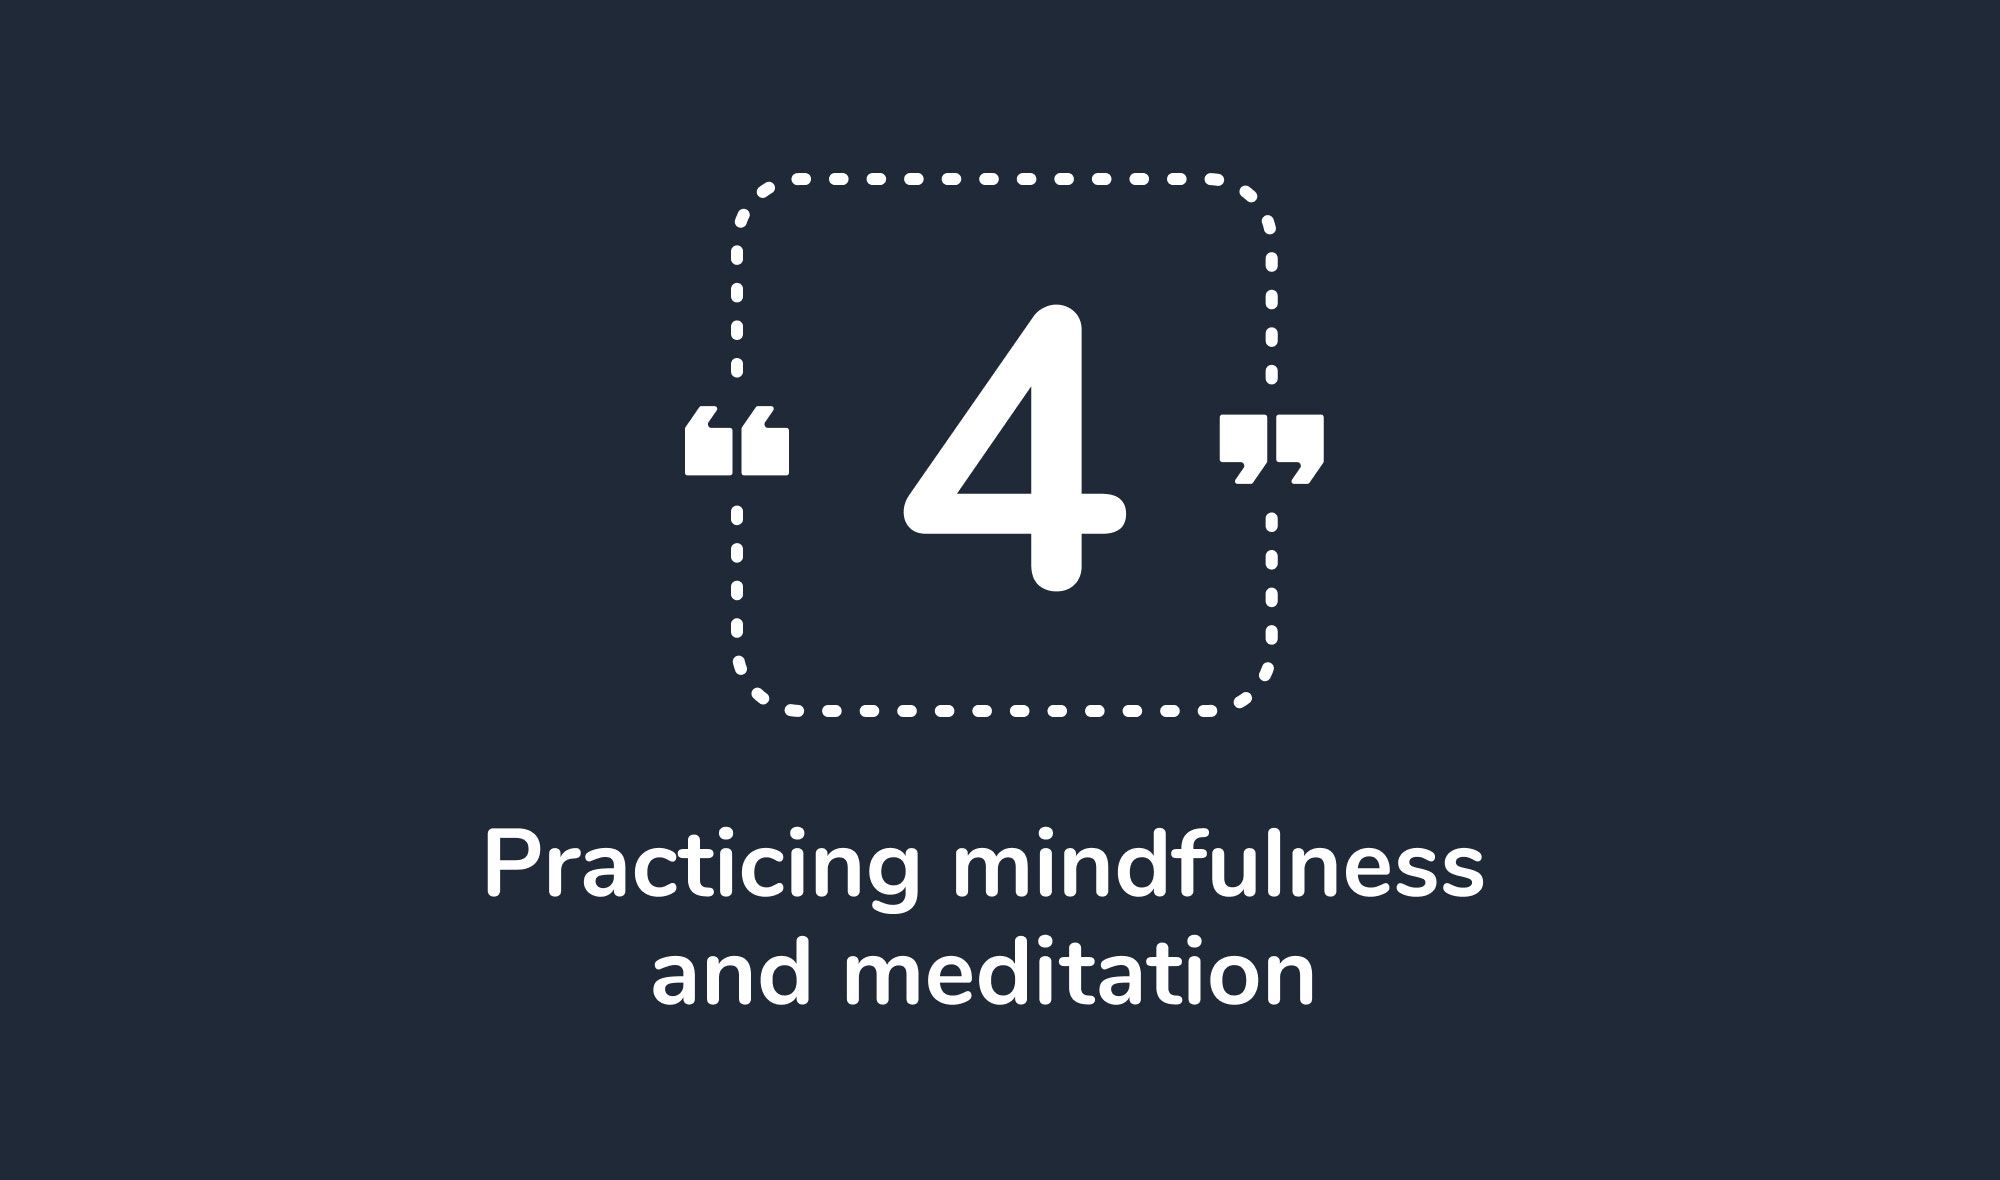 Flow state training - Practicing mindfulness and meditation